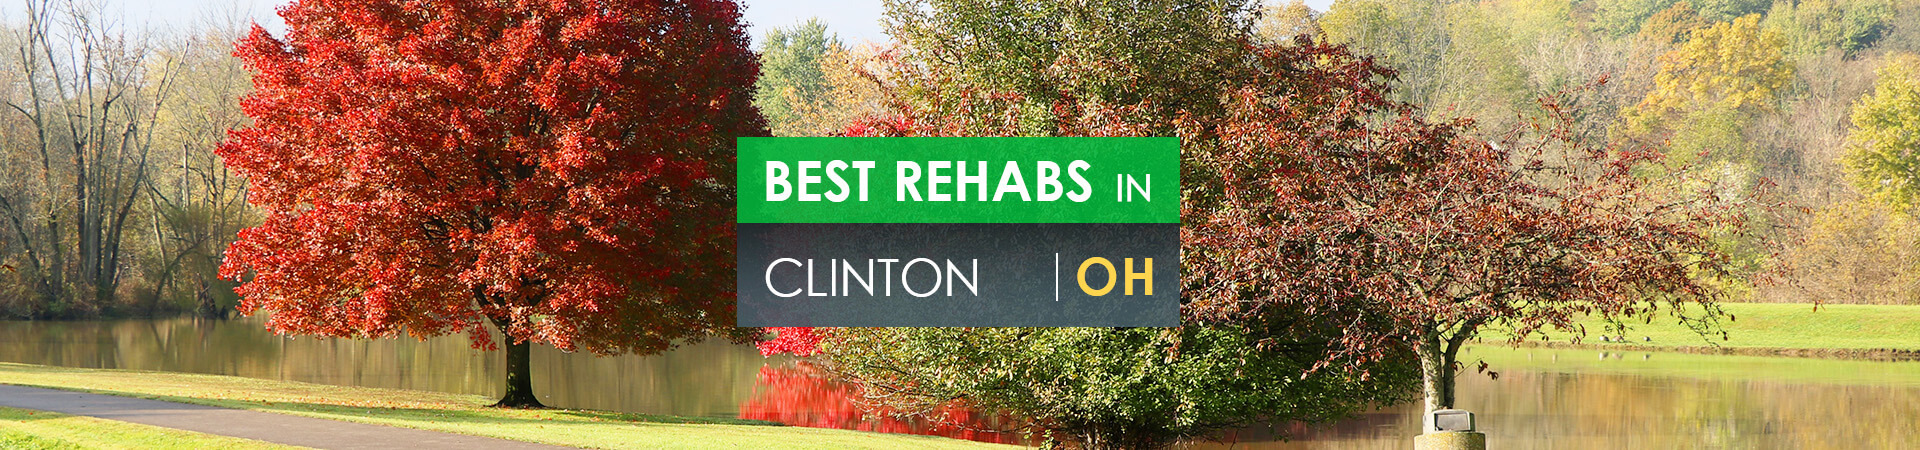 Best rehabs in Clinton, OH